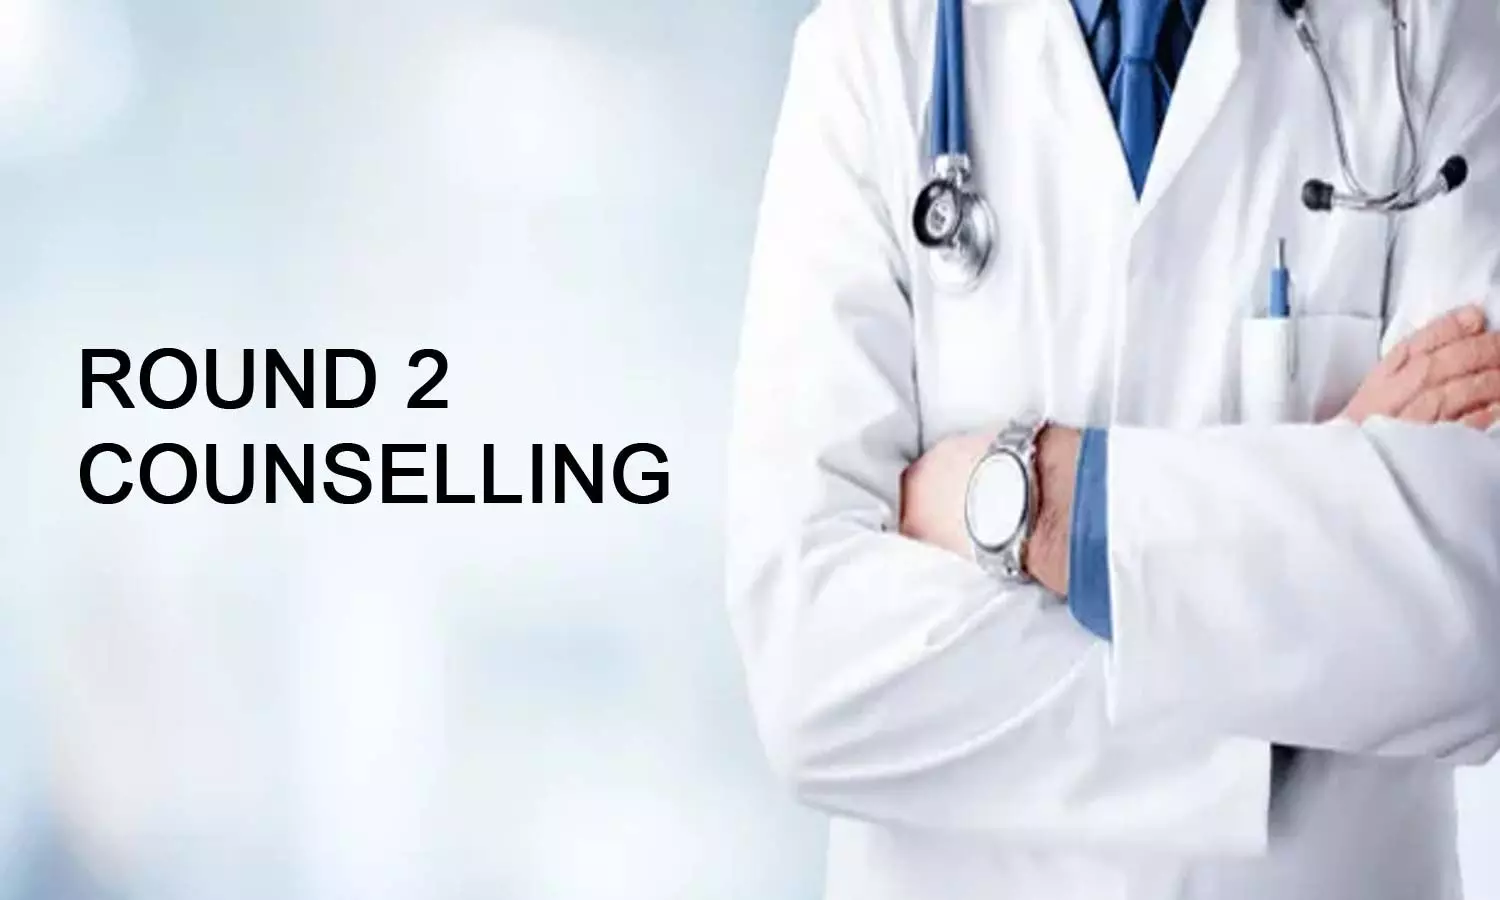 AIIMS PG July 2020: 301 seats up for grabs in Round 2 Counselling